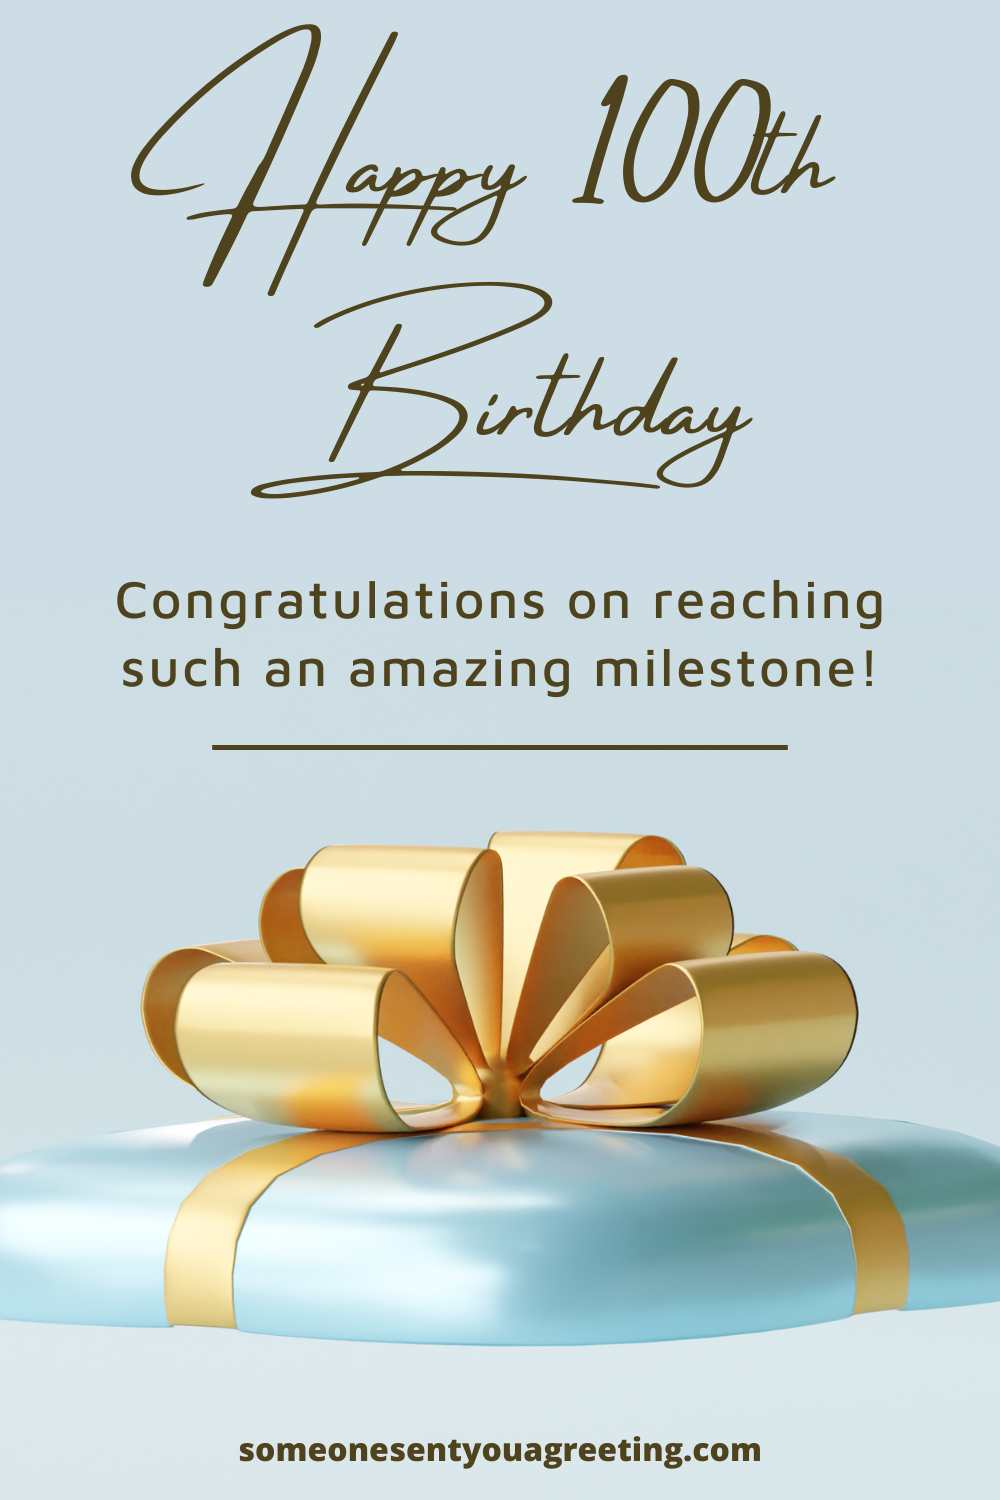 Happy 100th Birthday: 65+ Wishes, Messages & Poems - Someone Sent You A Greeting